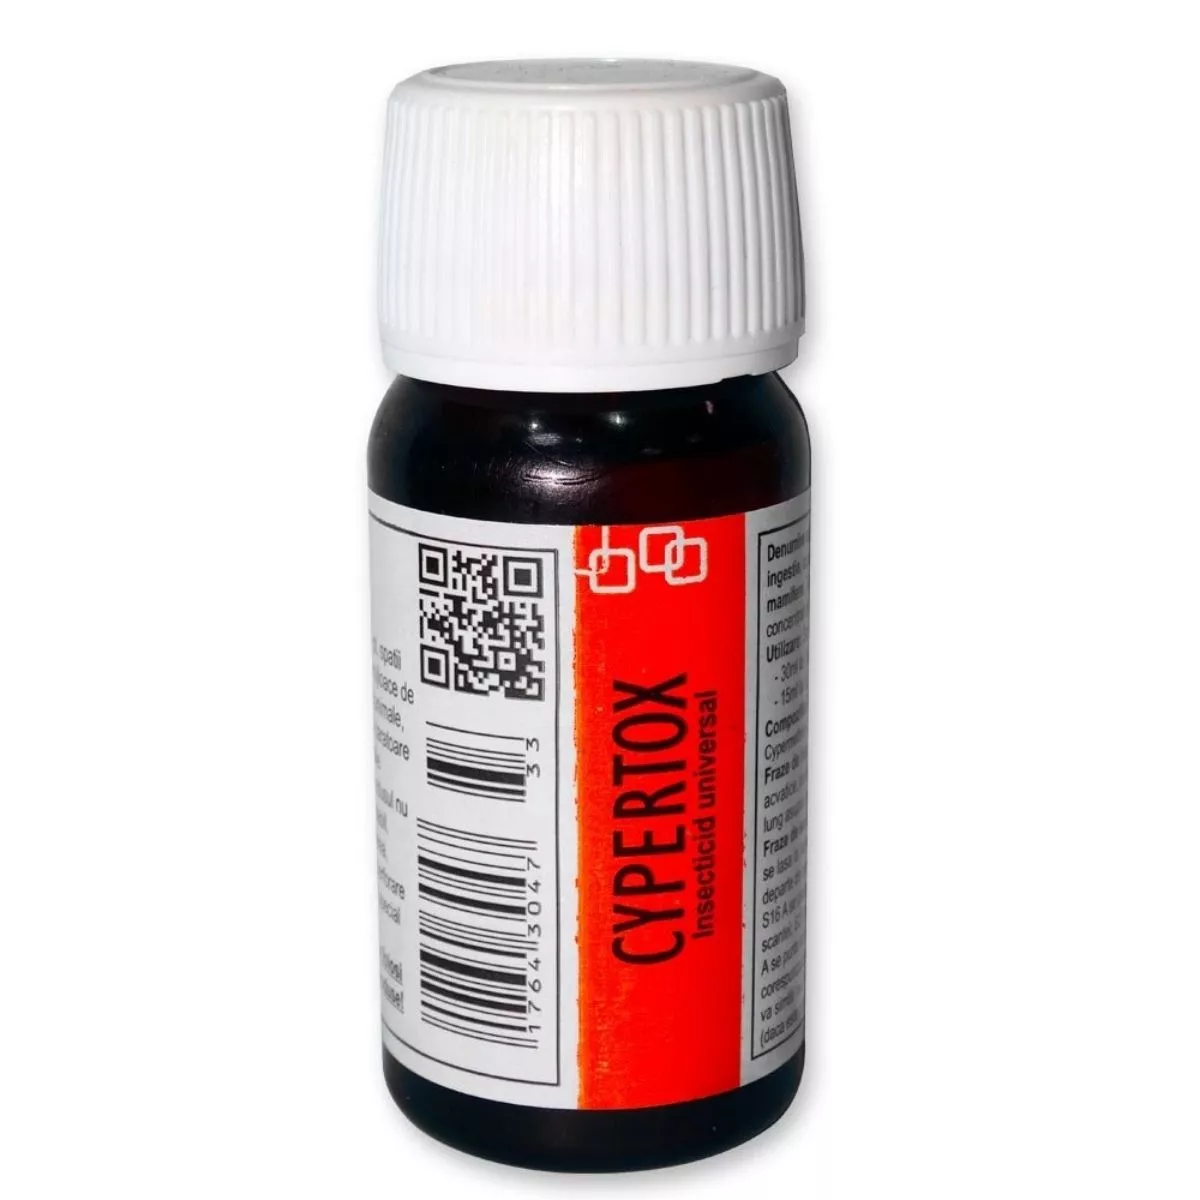 Insecticid concentrat CYPERTOX 50 ML ,Pestmaster 1